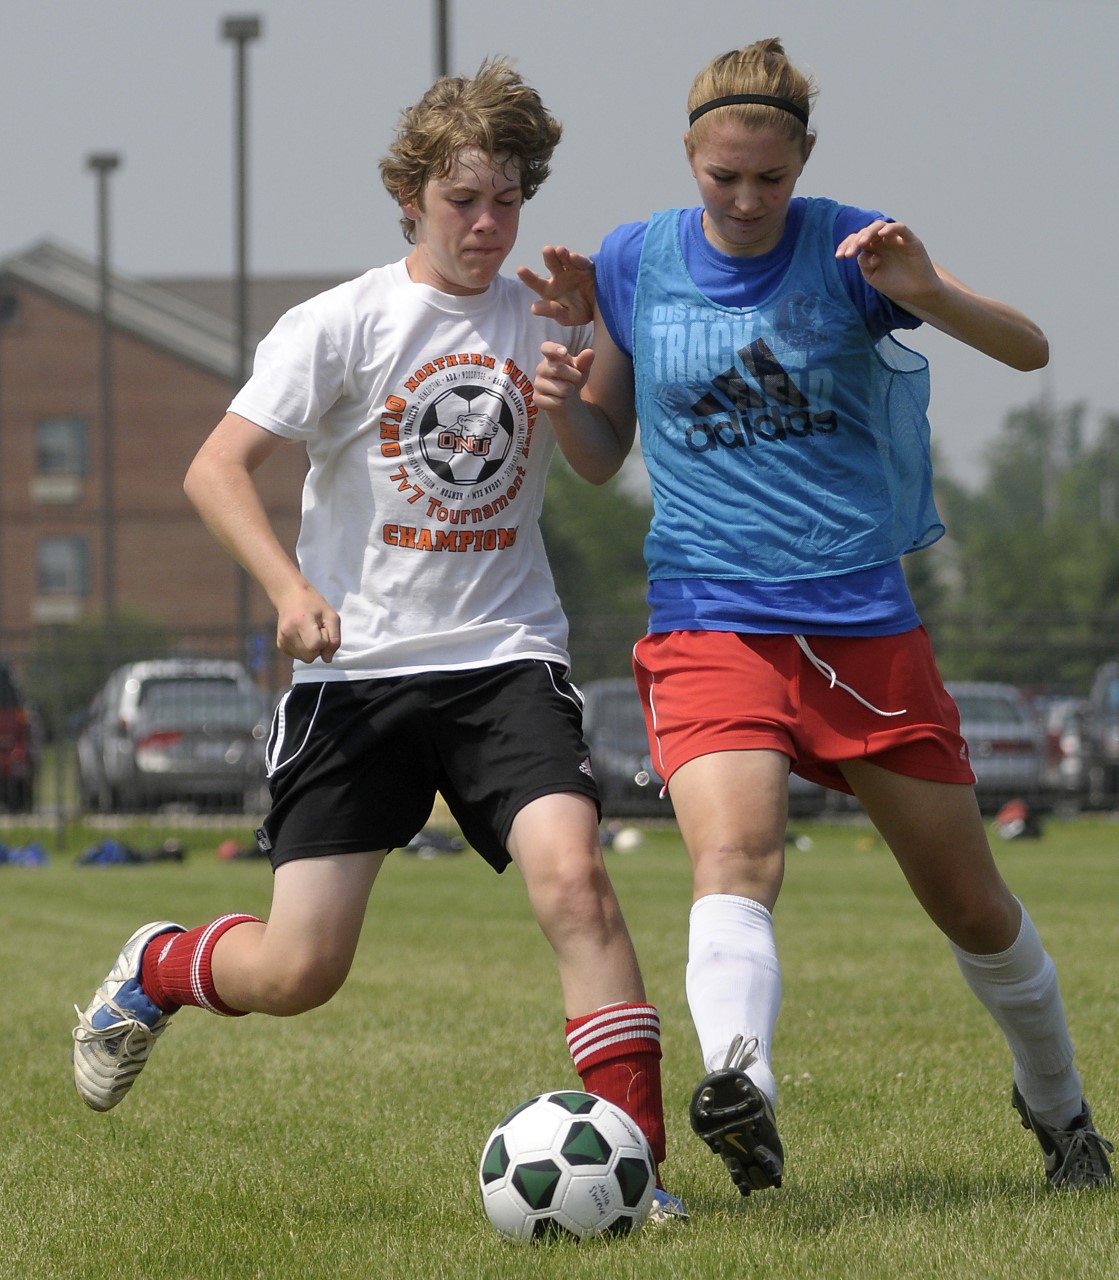 Two high school age soccer players, a male and female, challenge for the ball